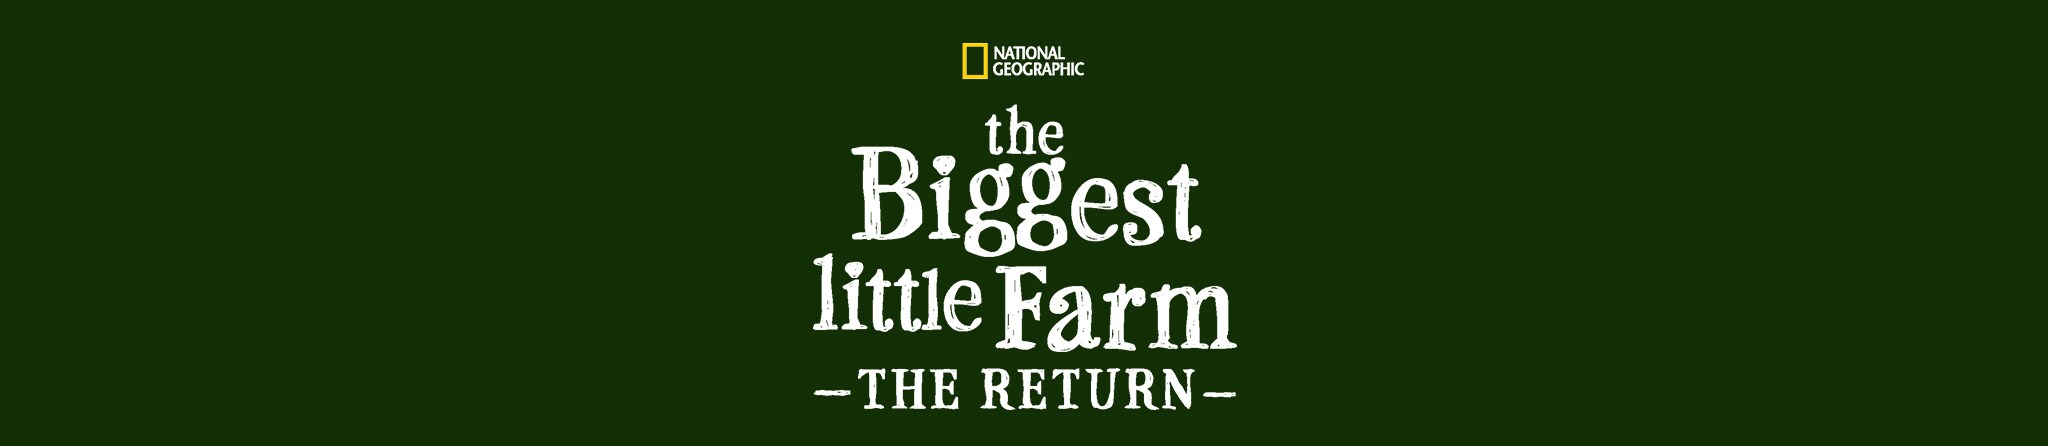 National Geographic | The Biggest Little Farm: The Return